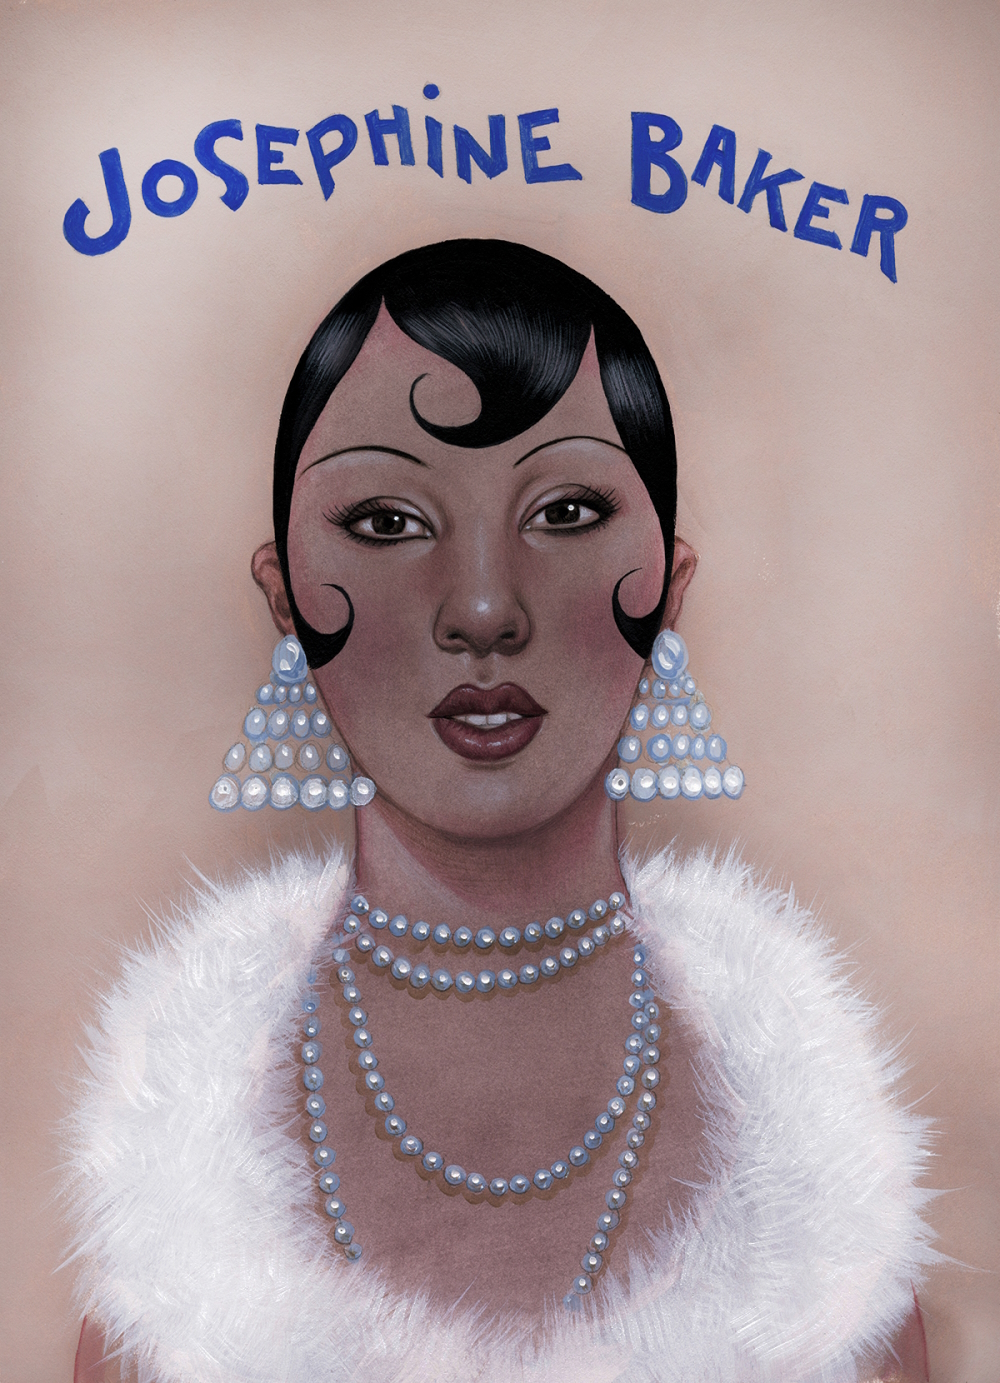 American-born French dancer, singer and actress Josephine Baker (1906-1975) is featured in 'Original Sisters: Portraits of Tenacity and Courage'.